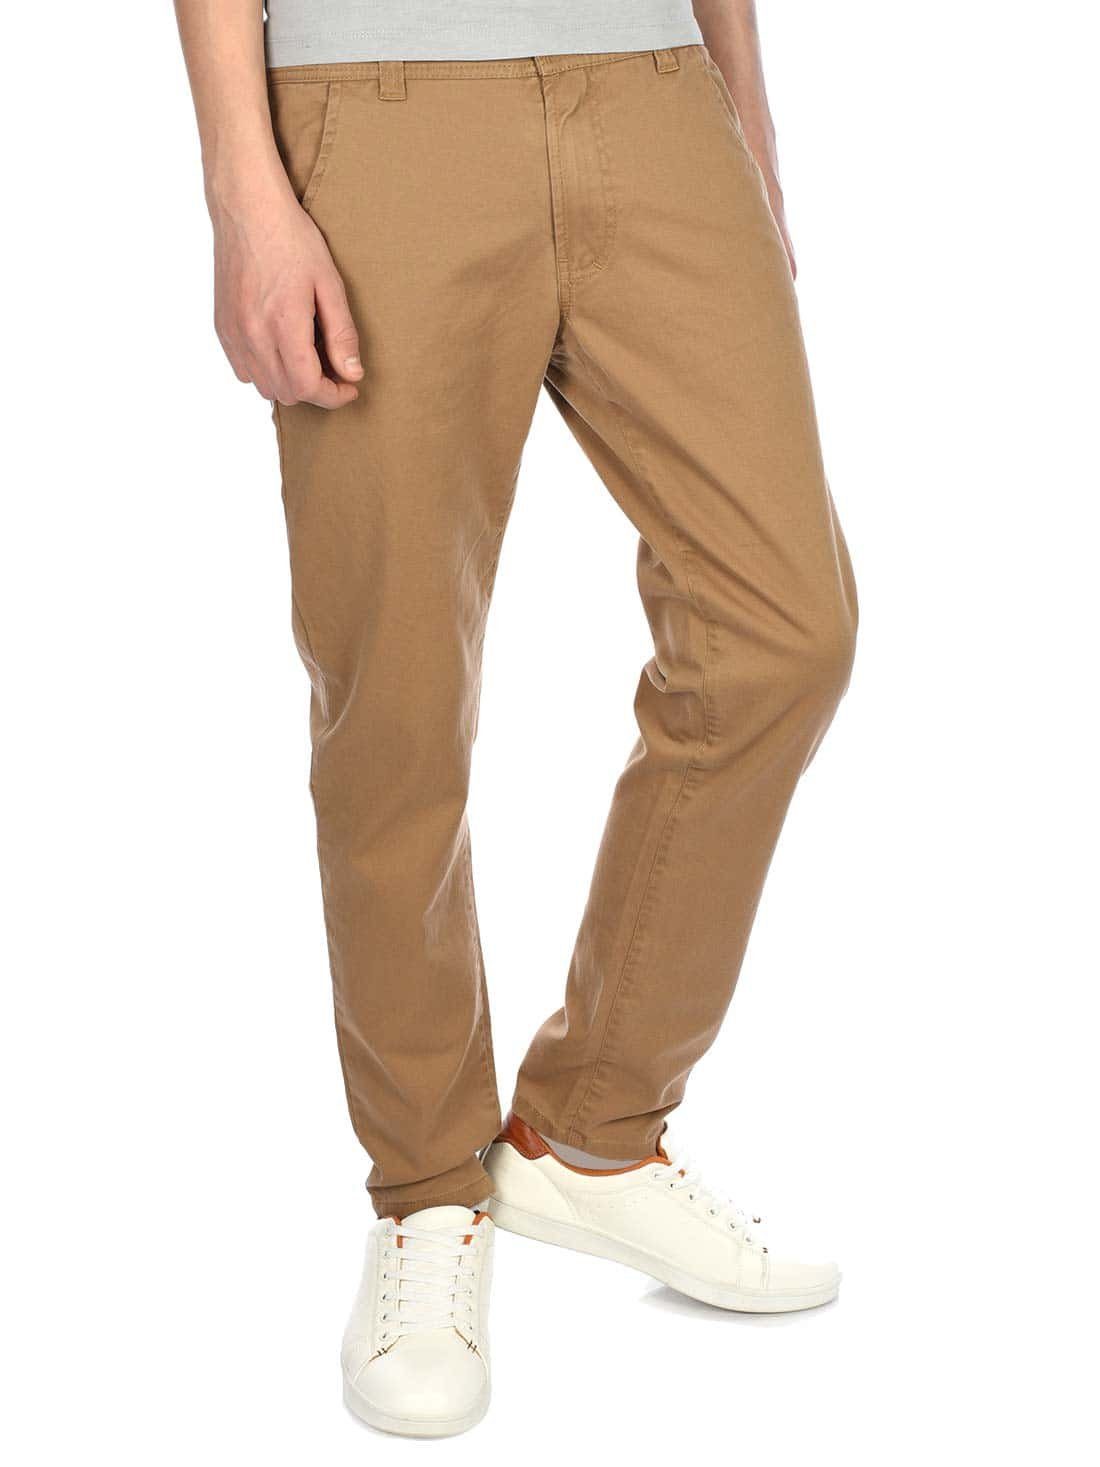 casual Beige Chinohose (1-tlg) BEZLIT Chino Hose Jungen